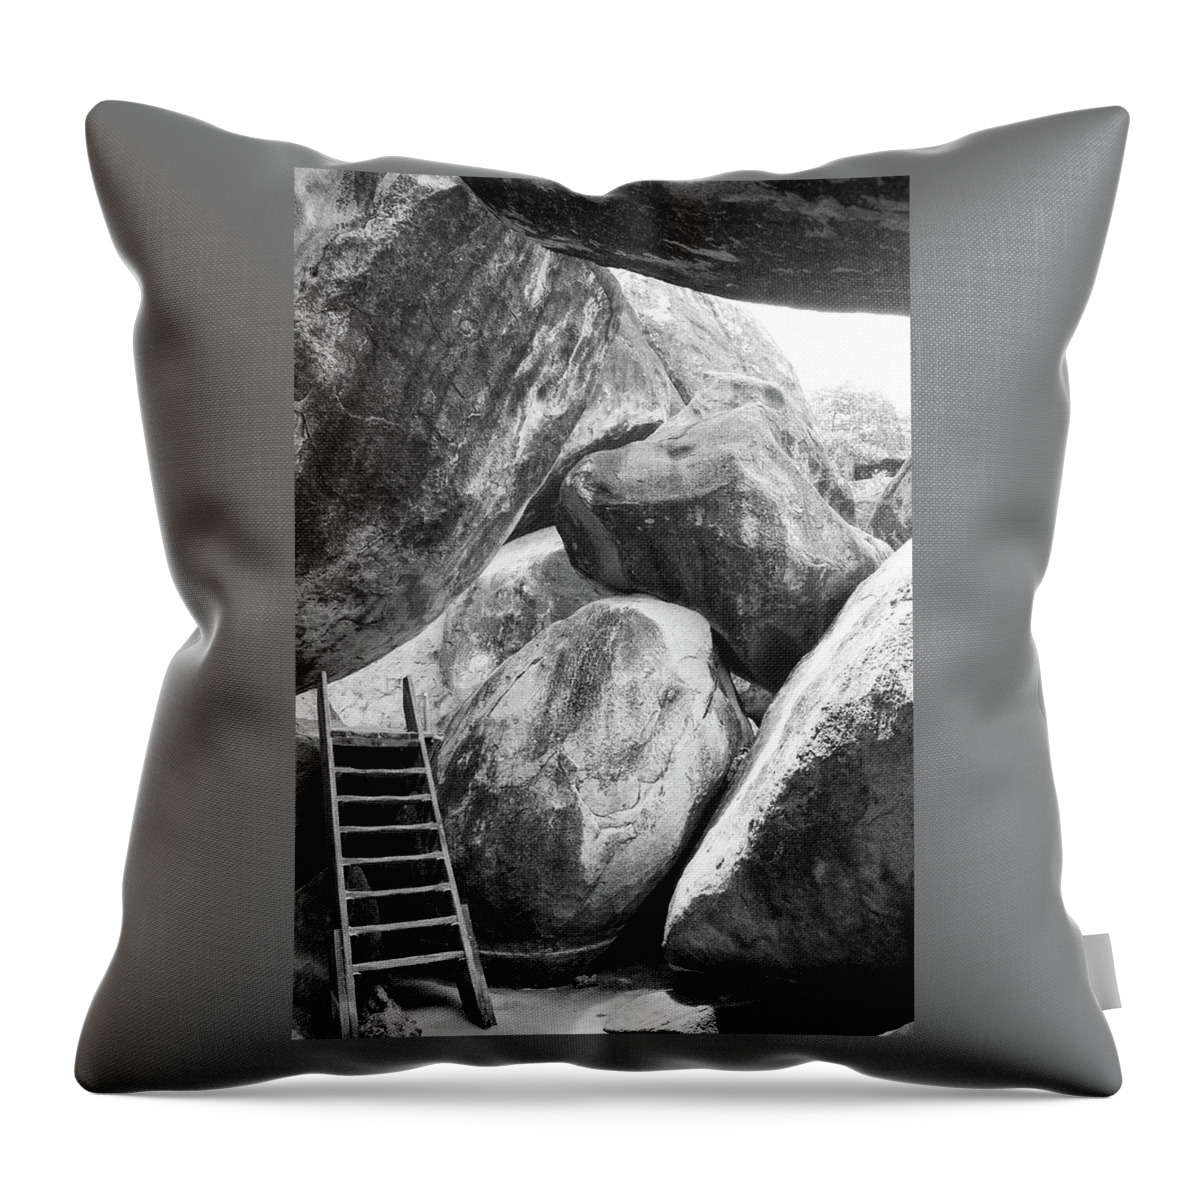 Baths National Park Throw Pillow featuring the photograph Baths National Park Rocks in Black and White by James C Richardson